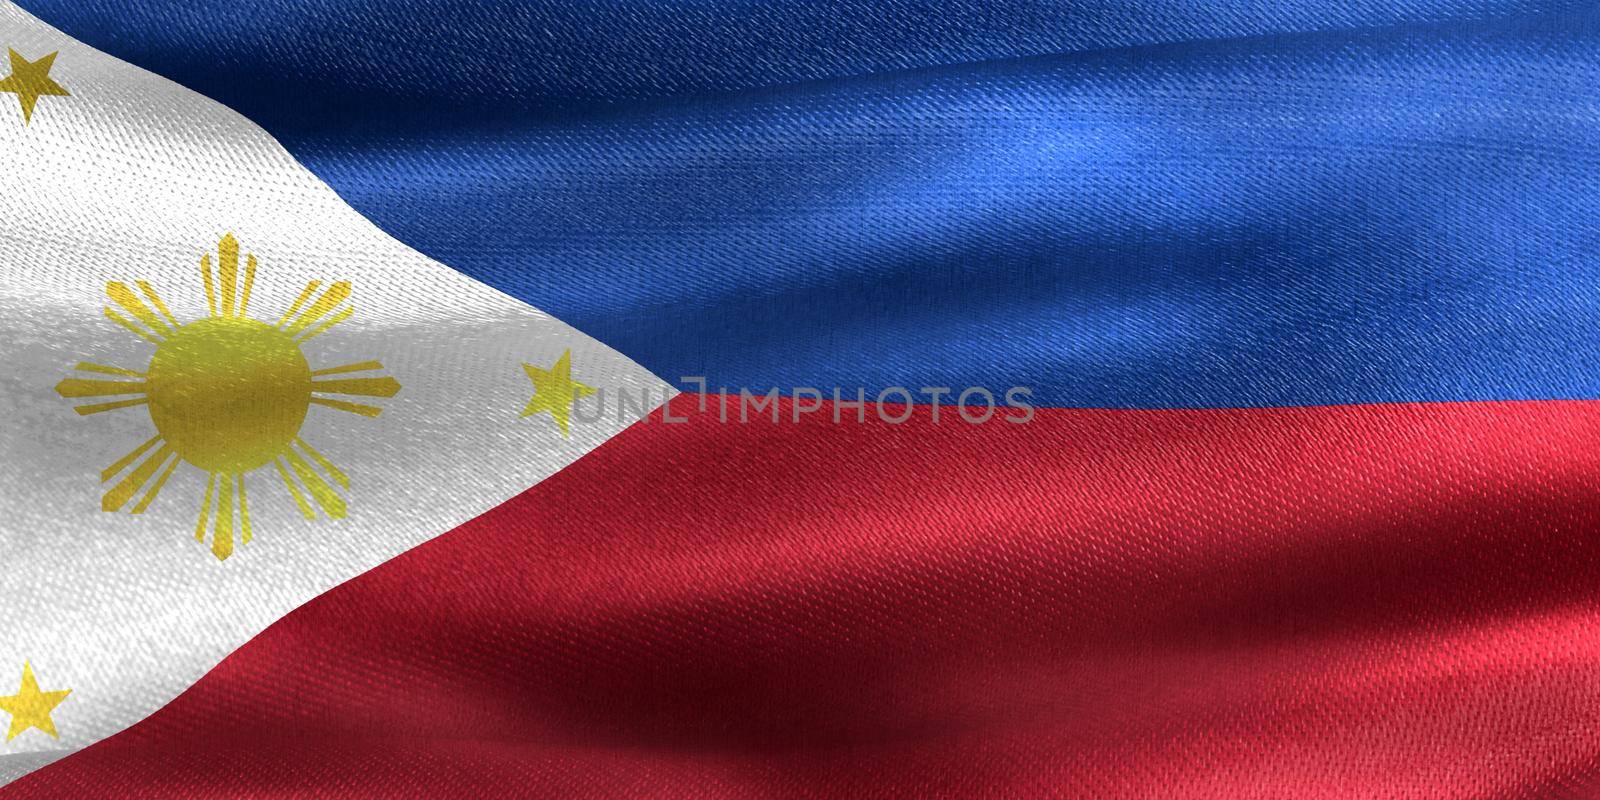 3D-Illustration of a Philippines flag - realistic waving fabric flag by MP_foto71